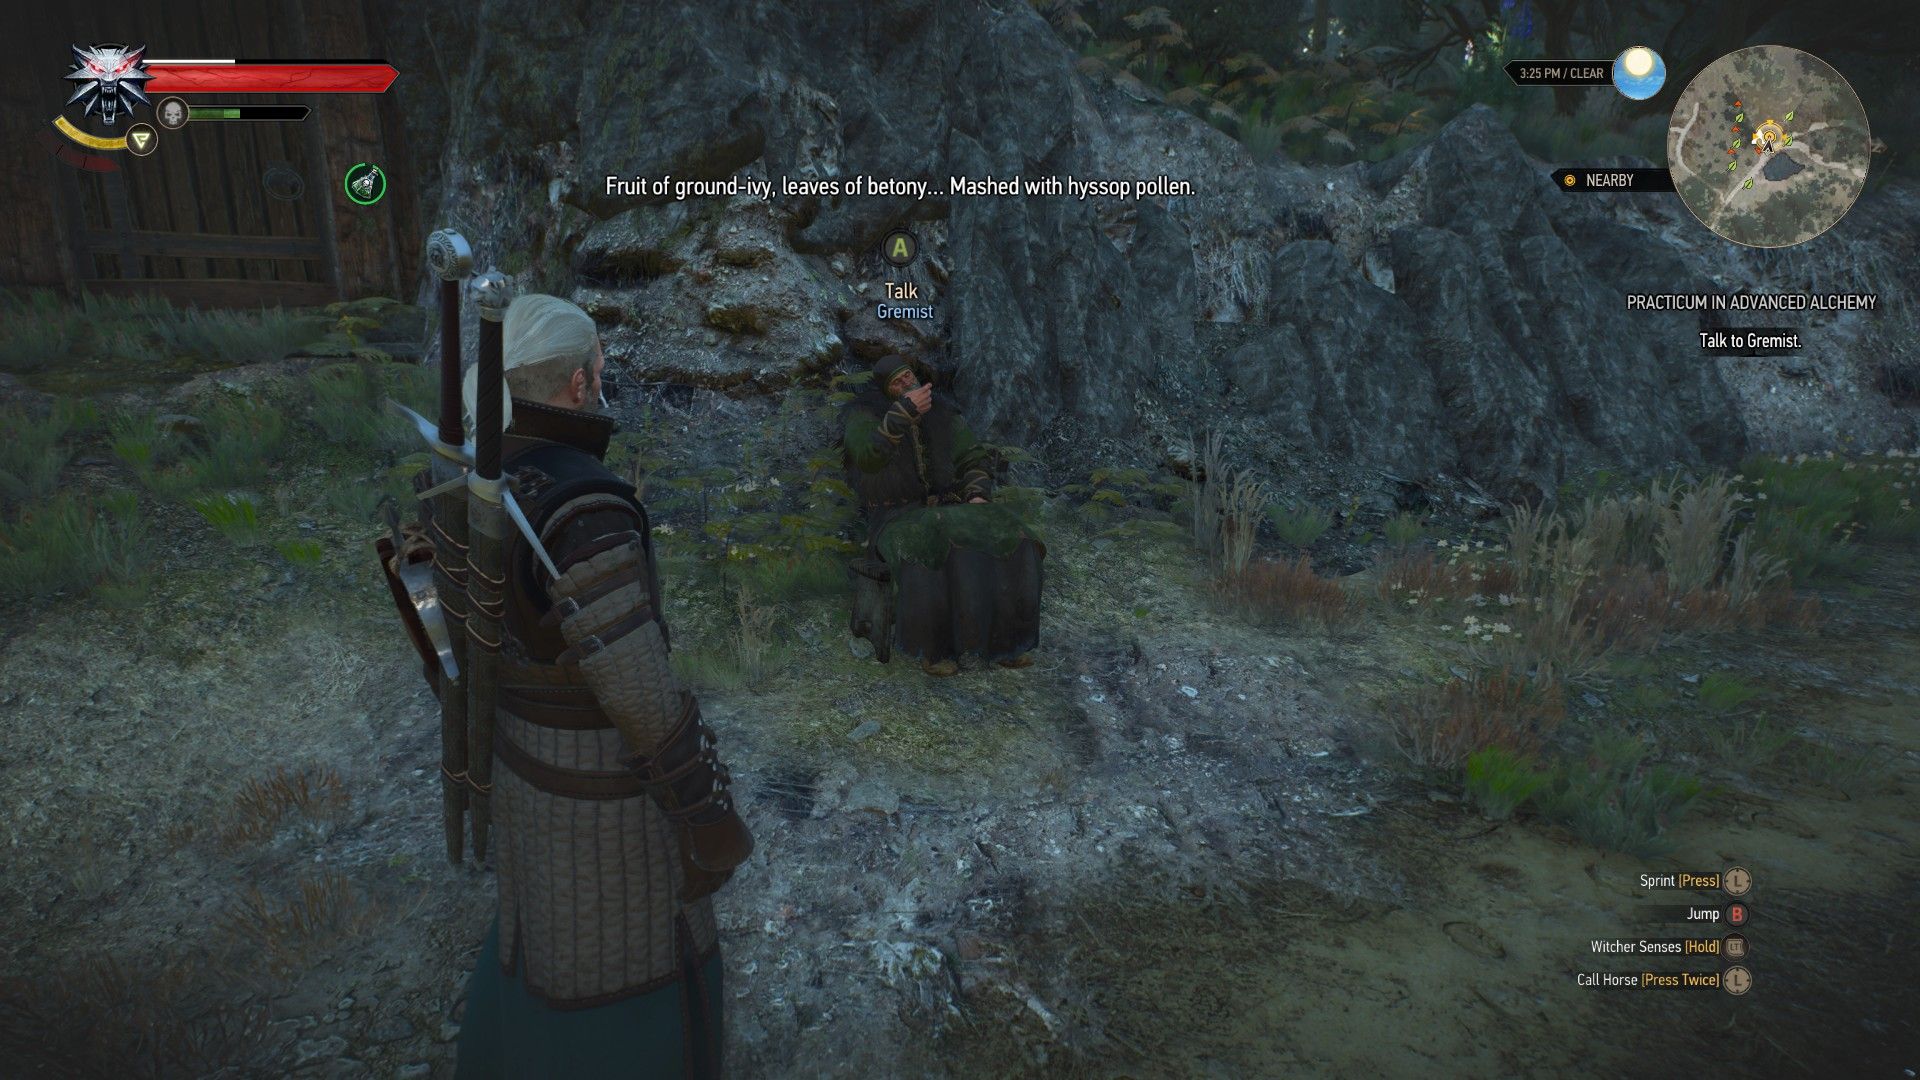 Geralt stands outside the cave and hears an old coot complaining about the world.